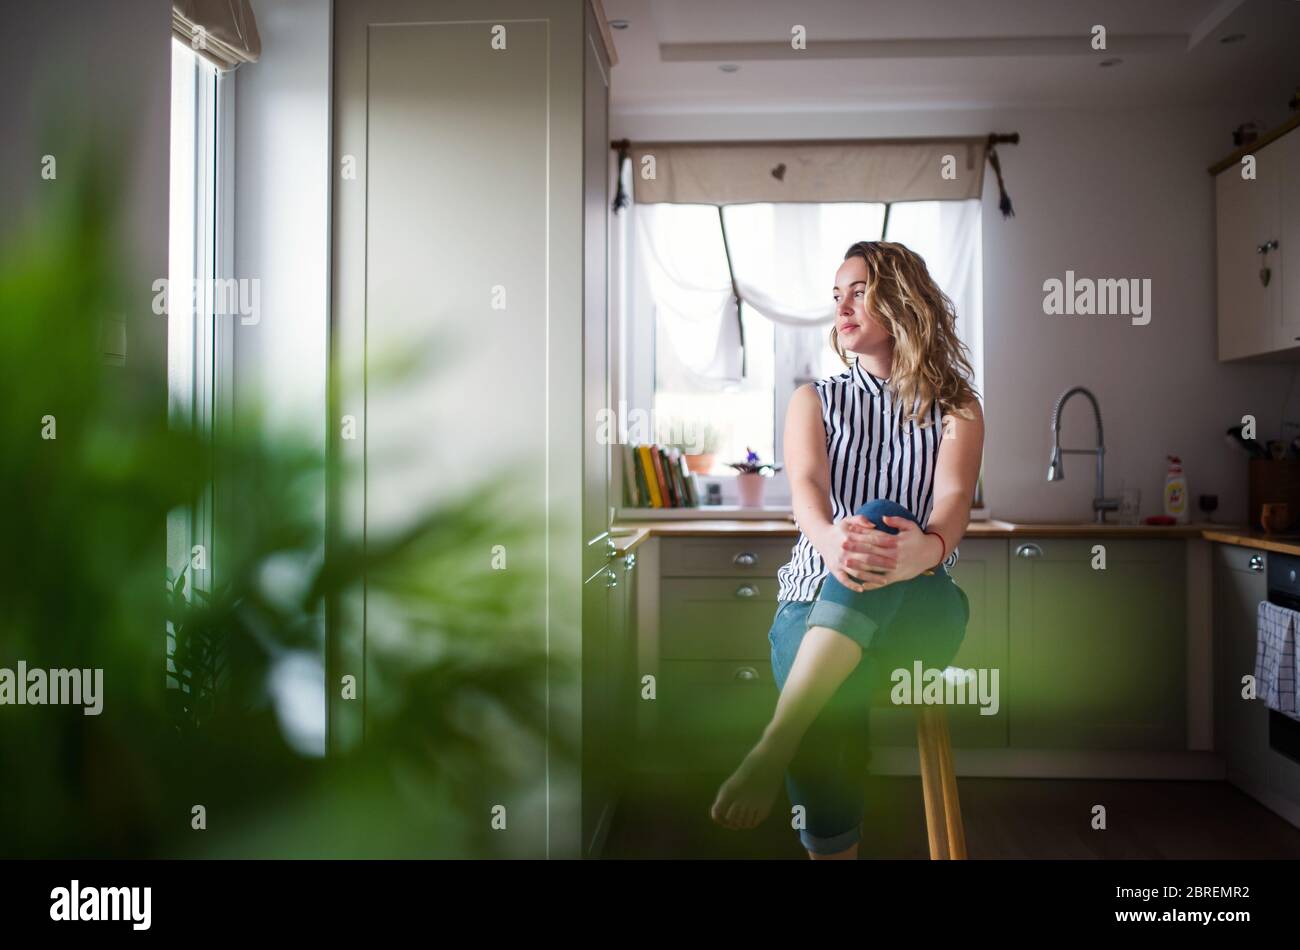 Young woman sitting in kitchen indoors at home, relaxing. Stock Photo